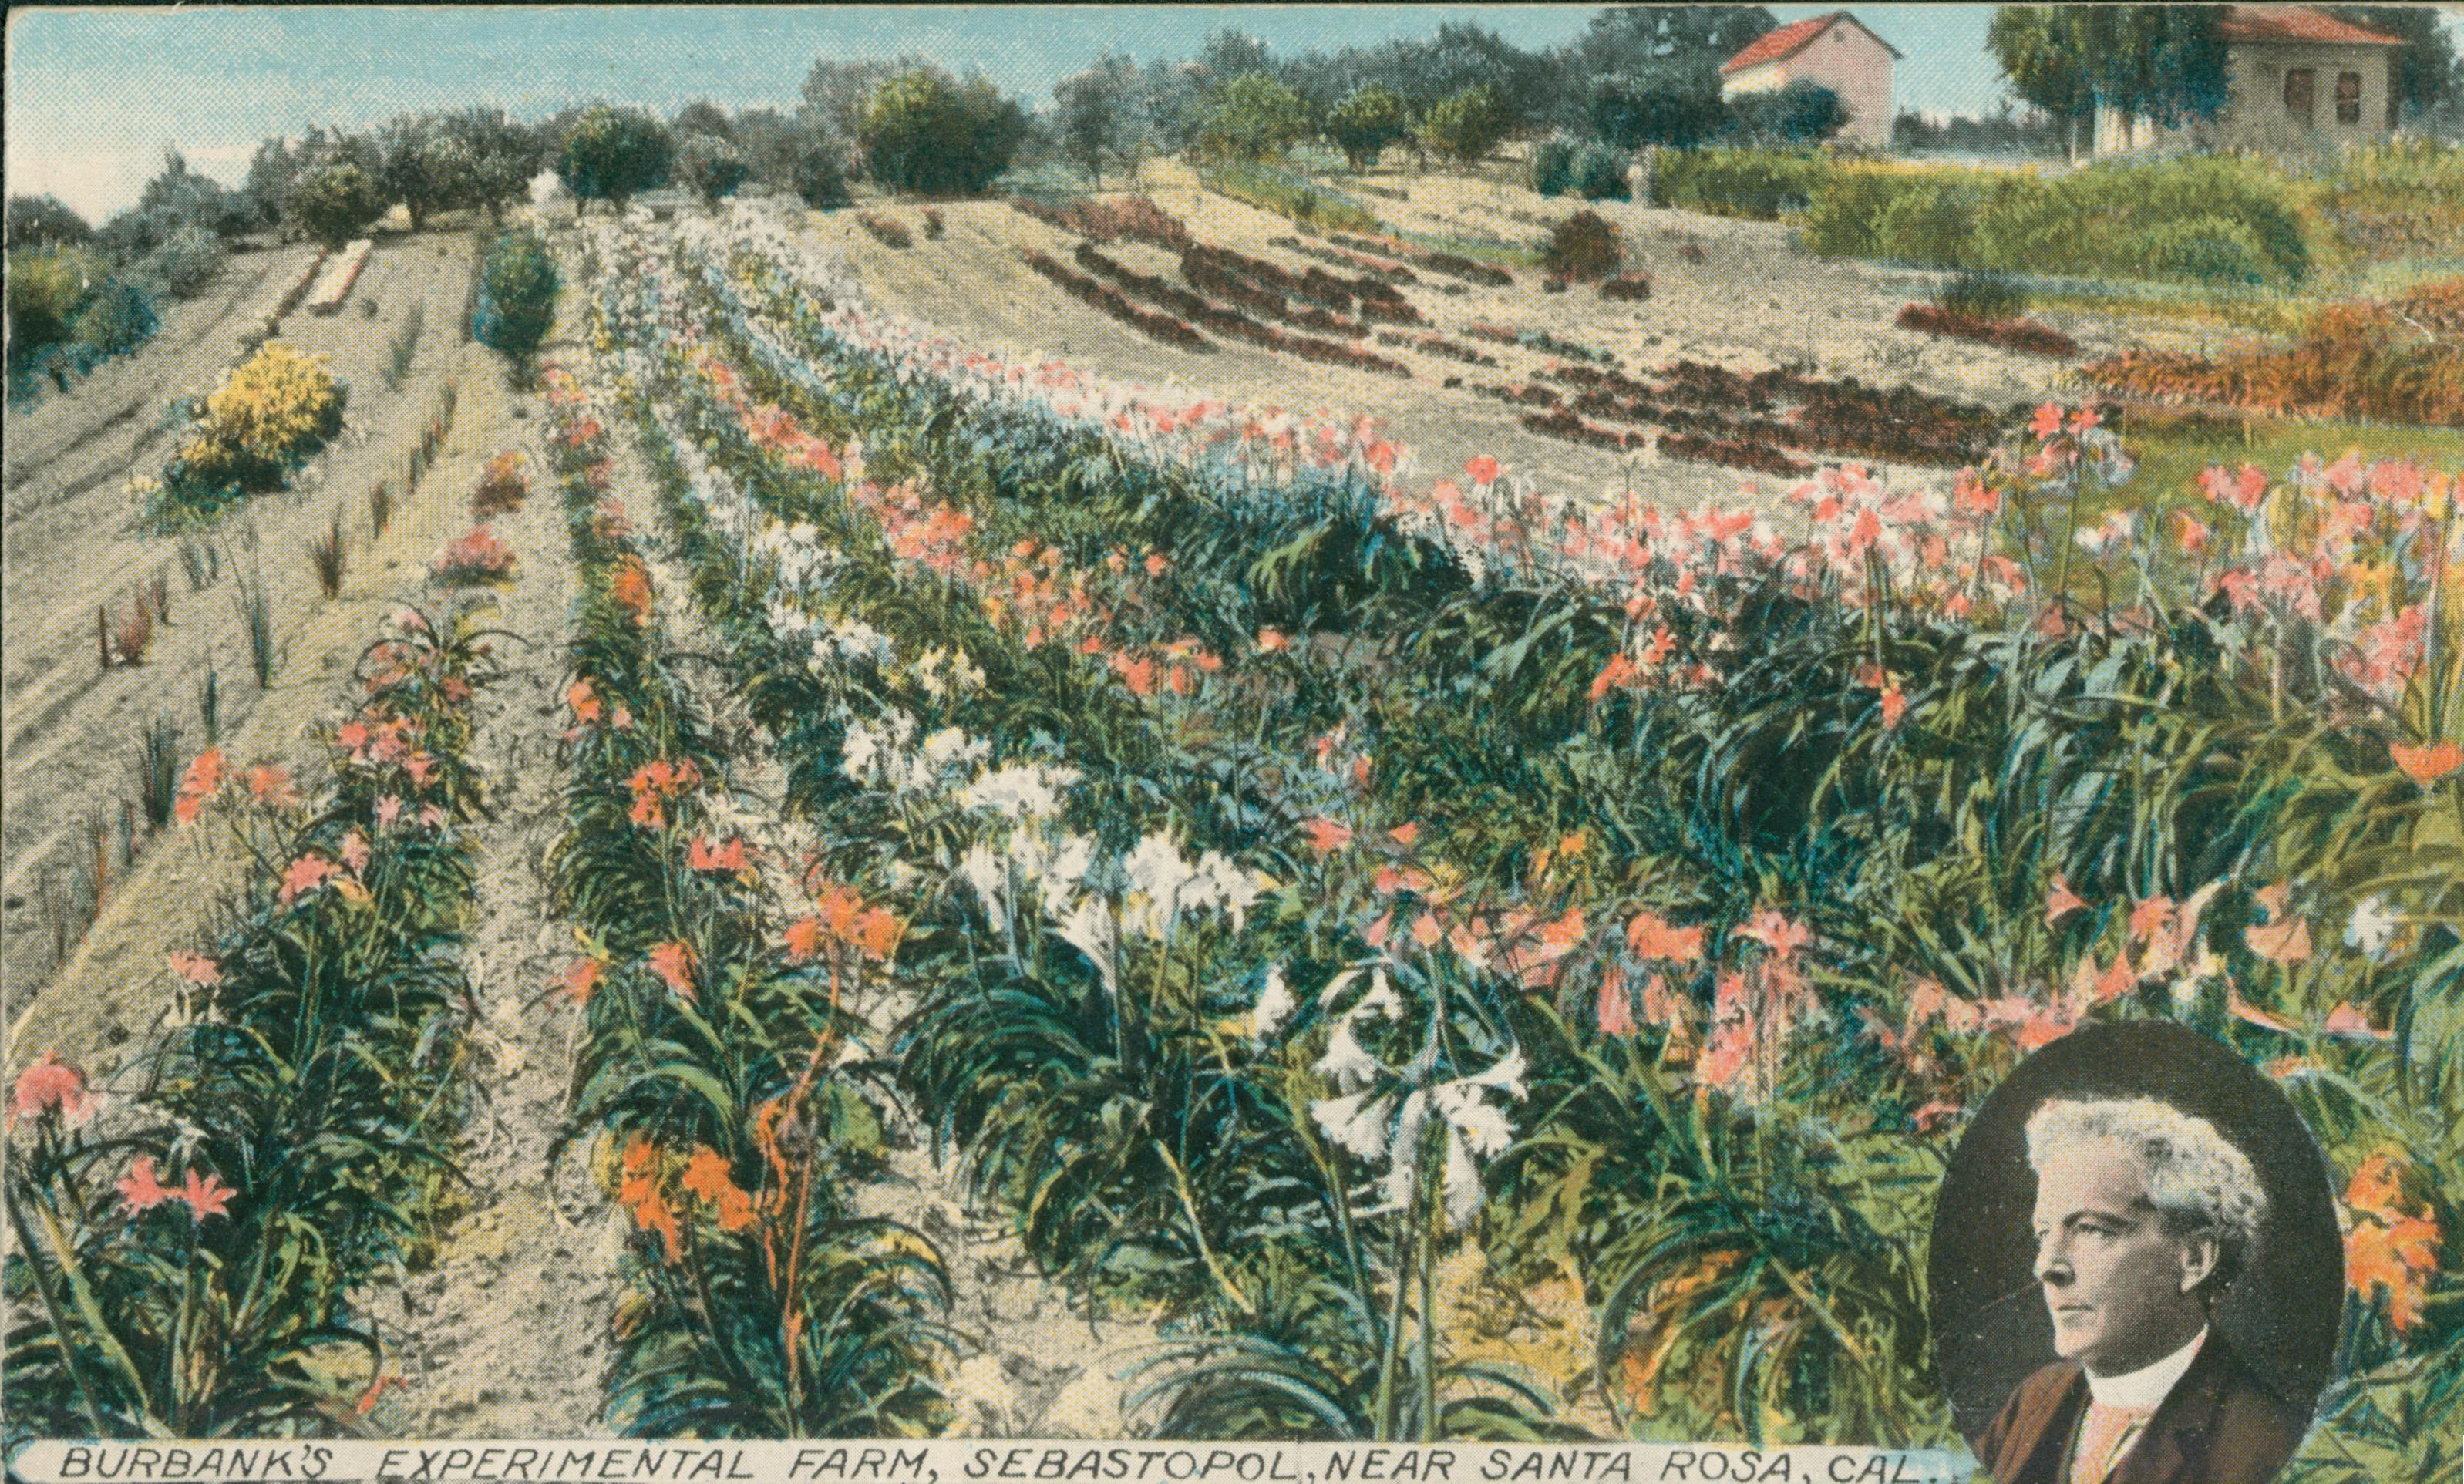 Shows several rows of flowers in bloom with a vignette portrait of Burbank on the lower right.